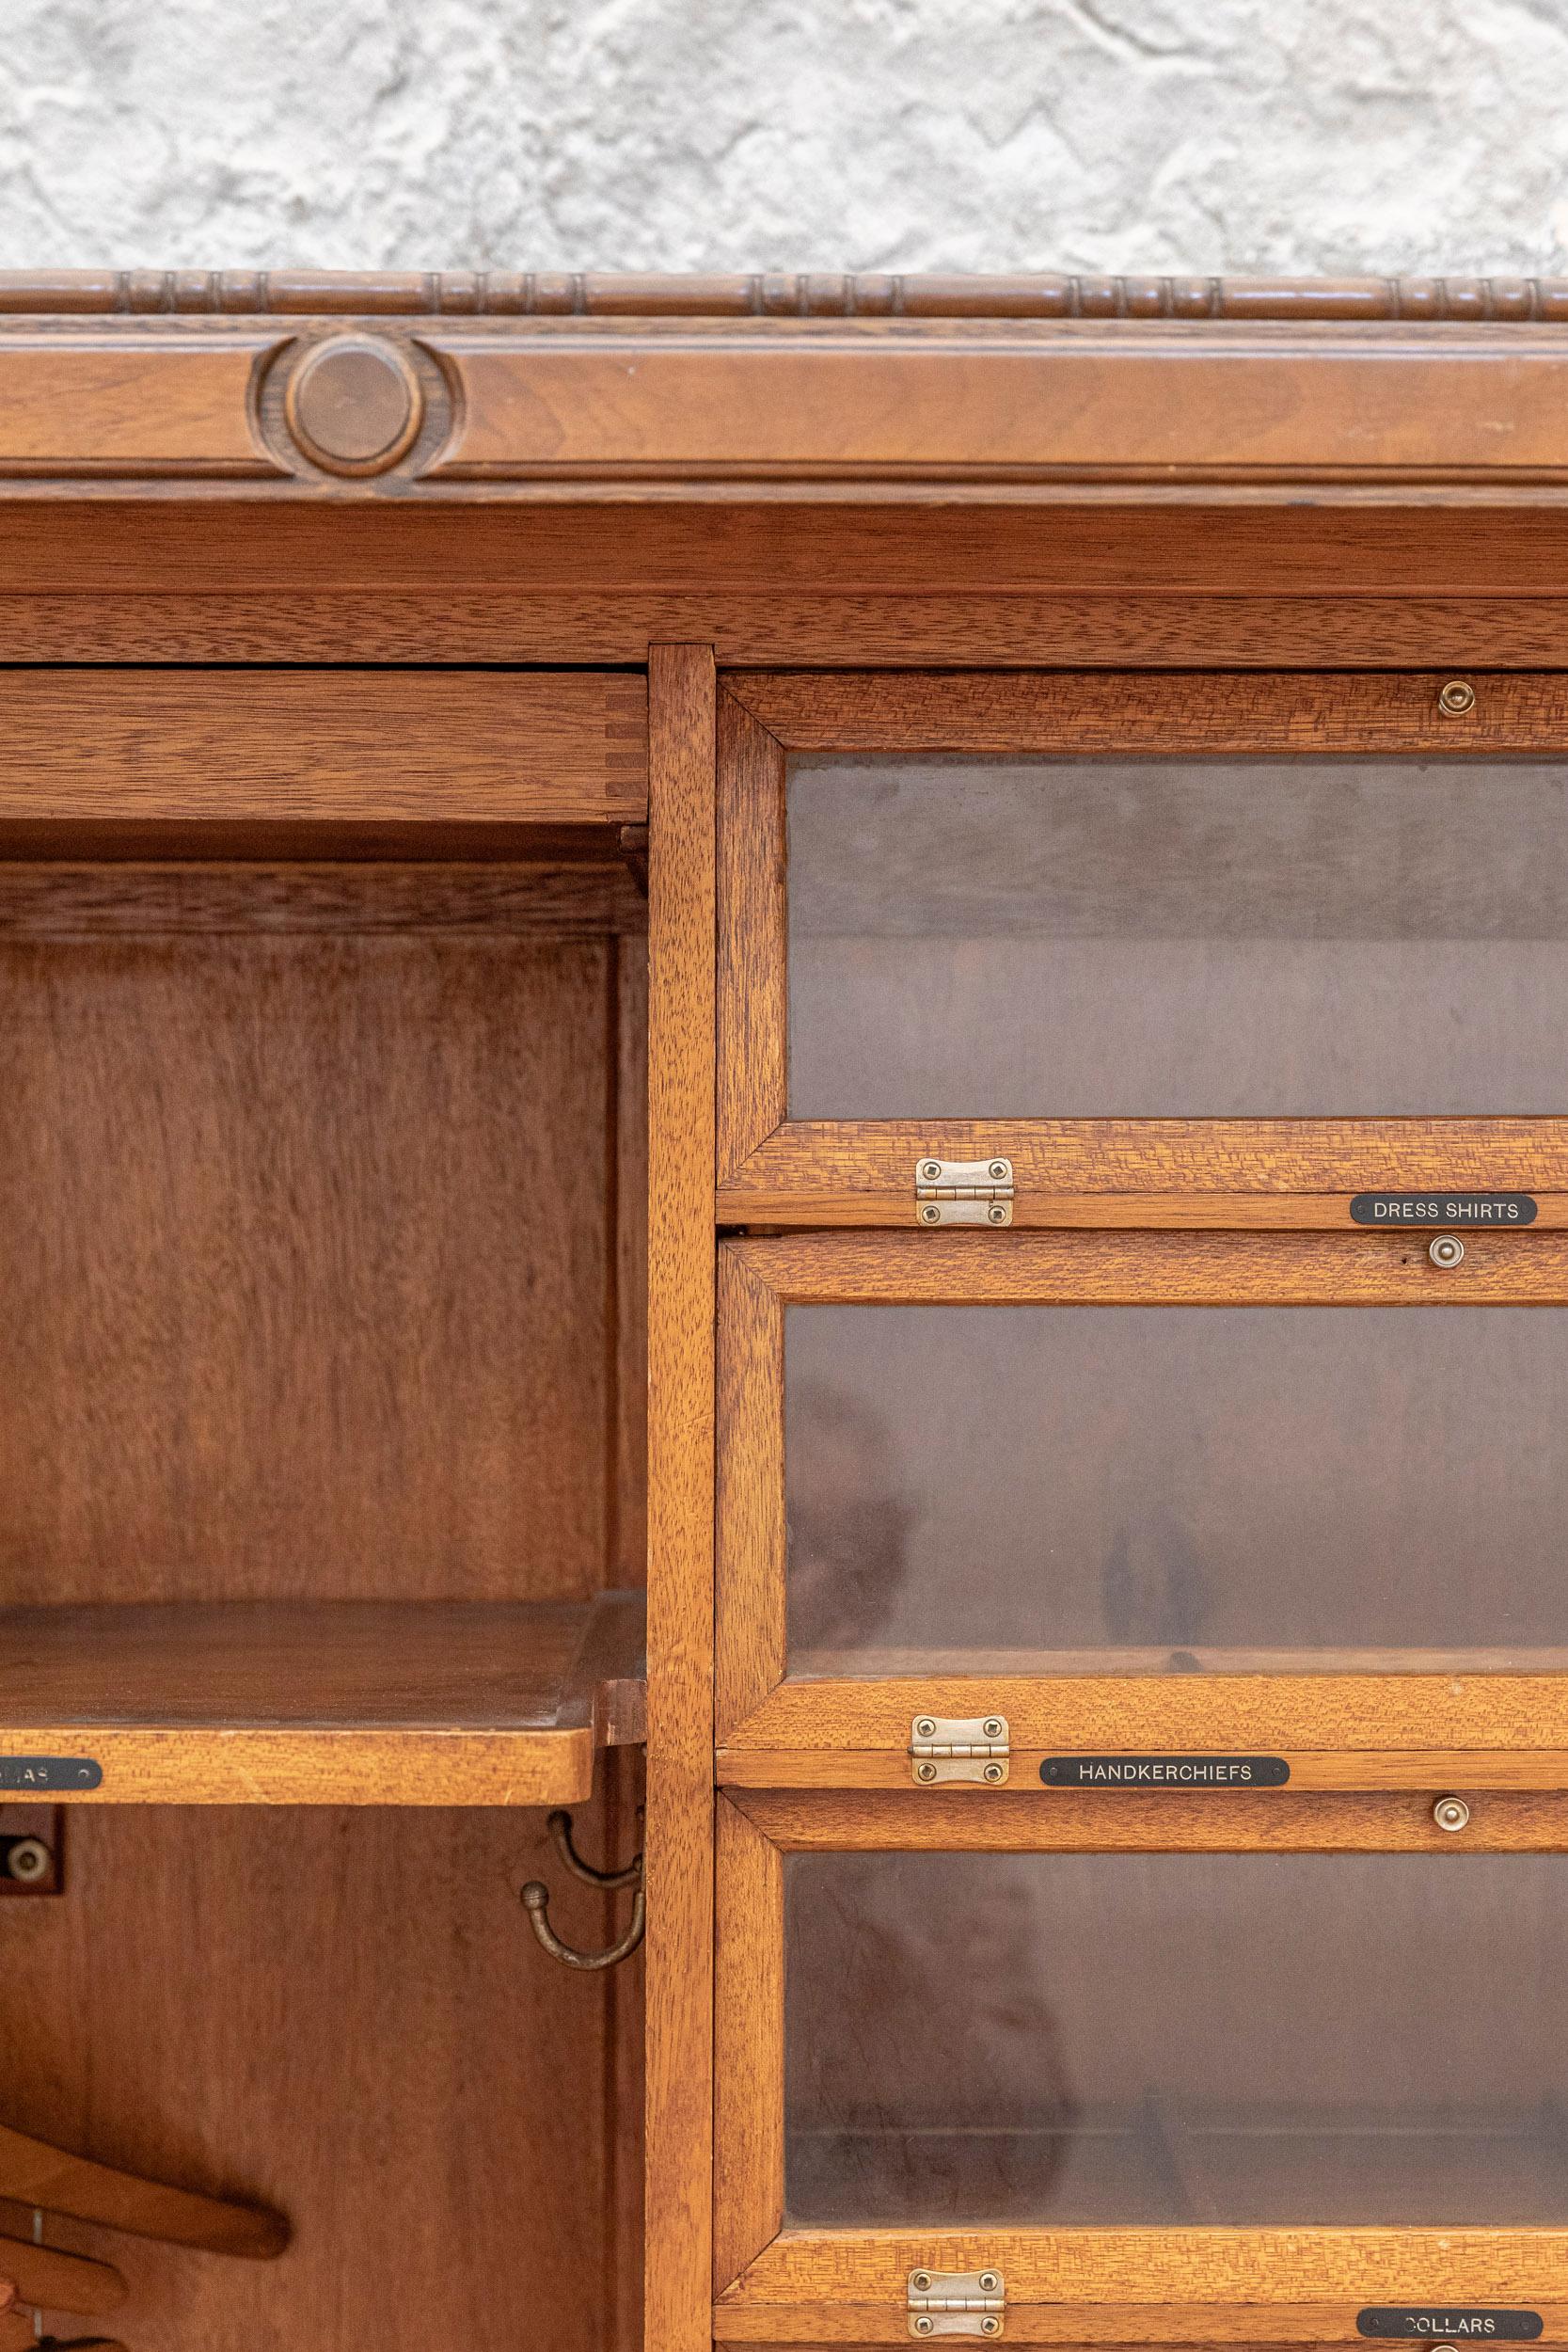 Early 20th Century Iconic Oak Wardrobe by Compactom London